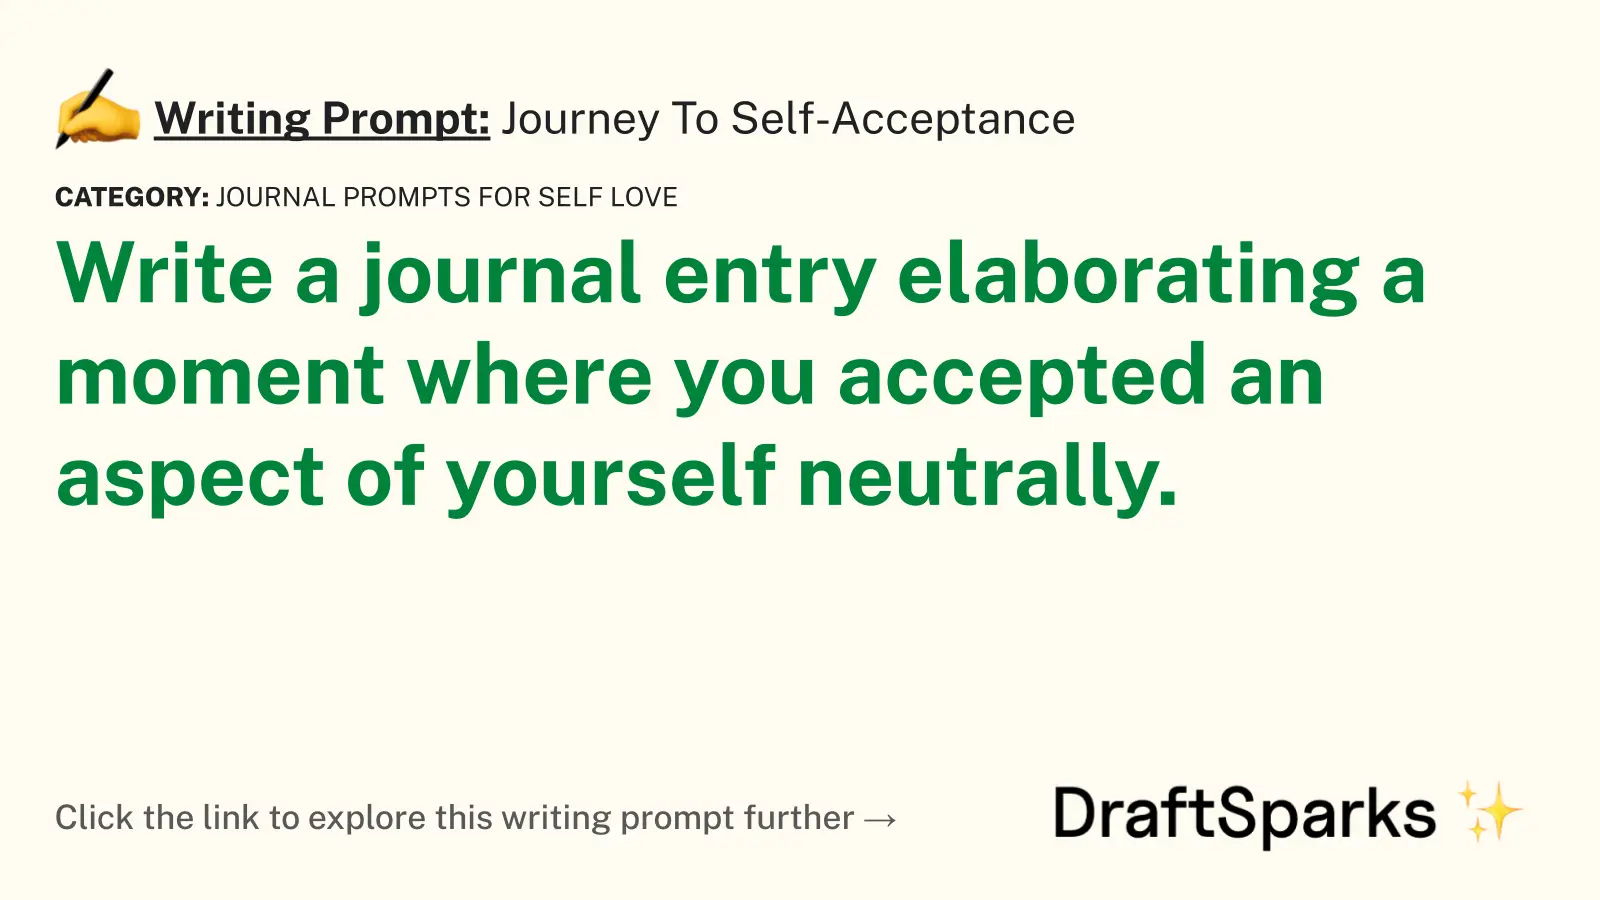 Journey To Self-Acceptance